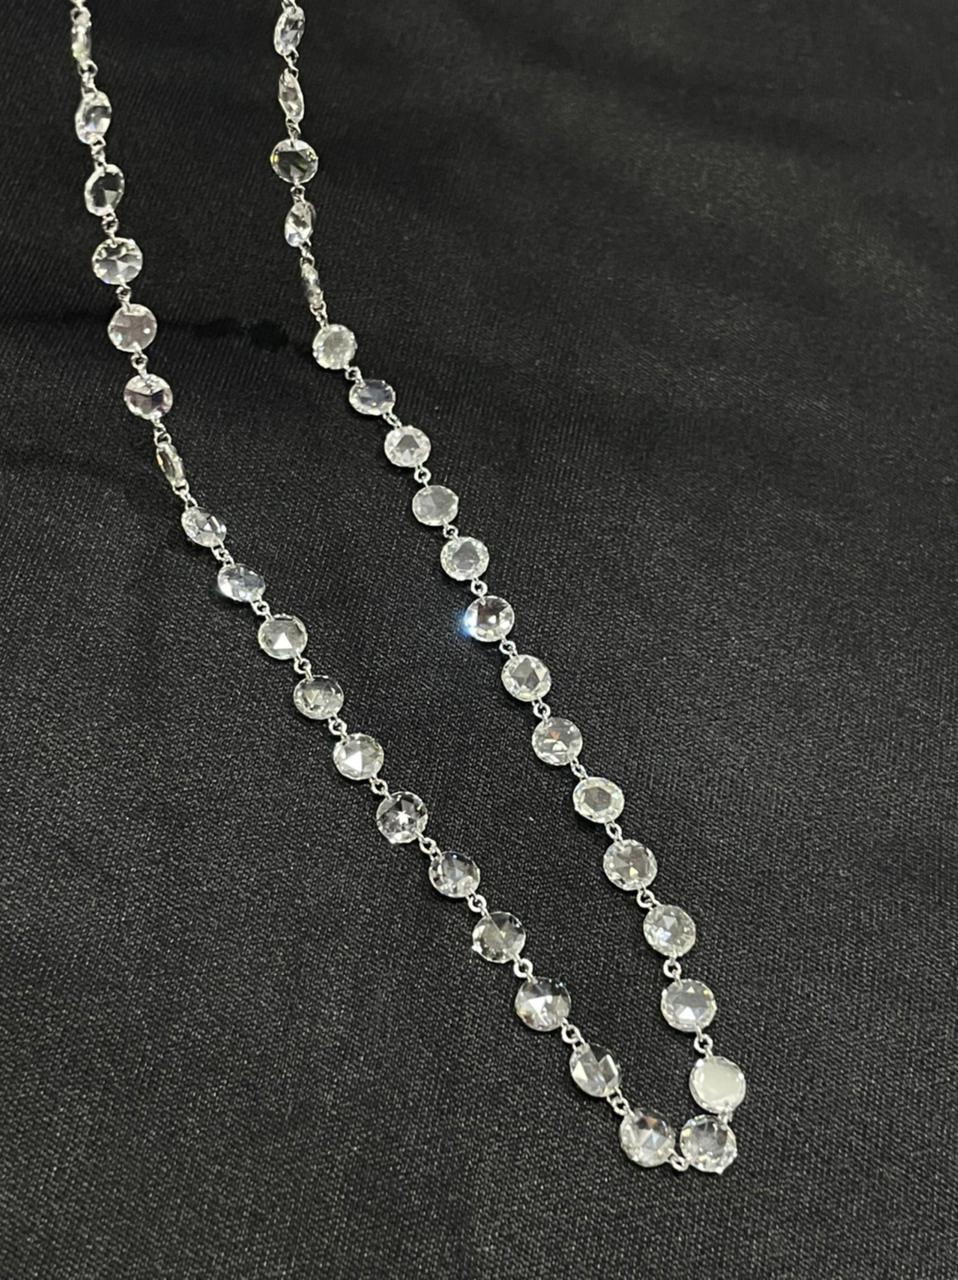 PANIM 10.95cts Rosecut Diamond Necklace in 18 Karat White Gold In New Condition For Sale In Tsim Sha Tsui, Hong Kong